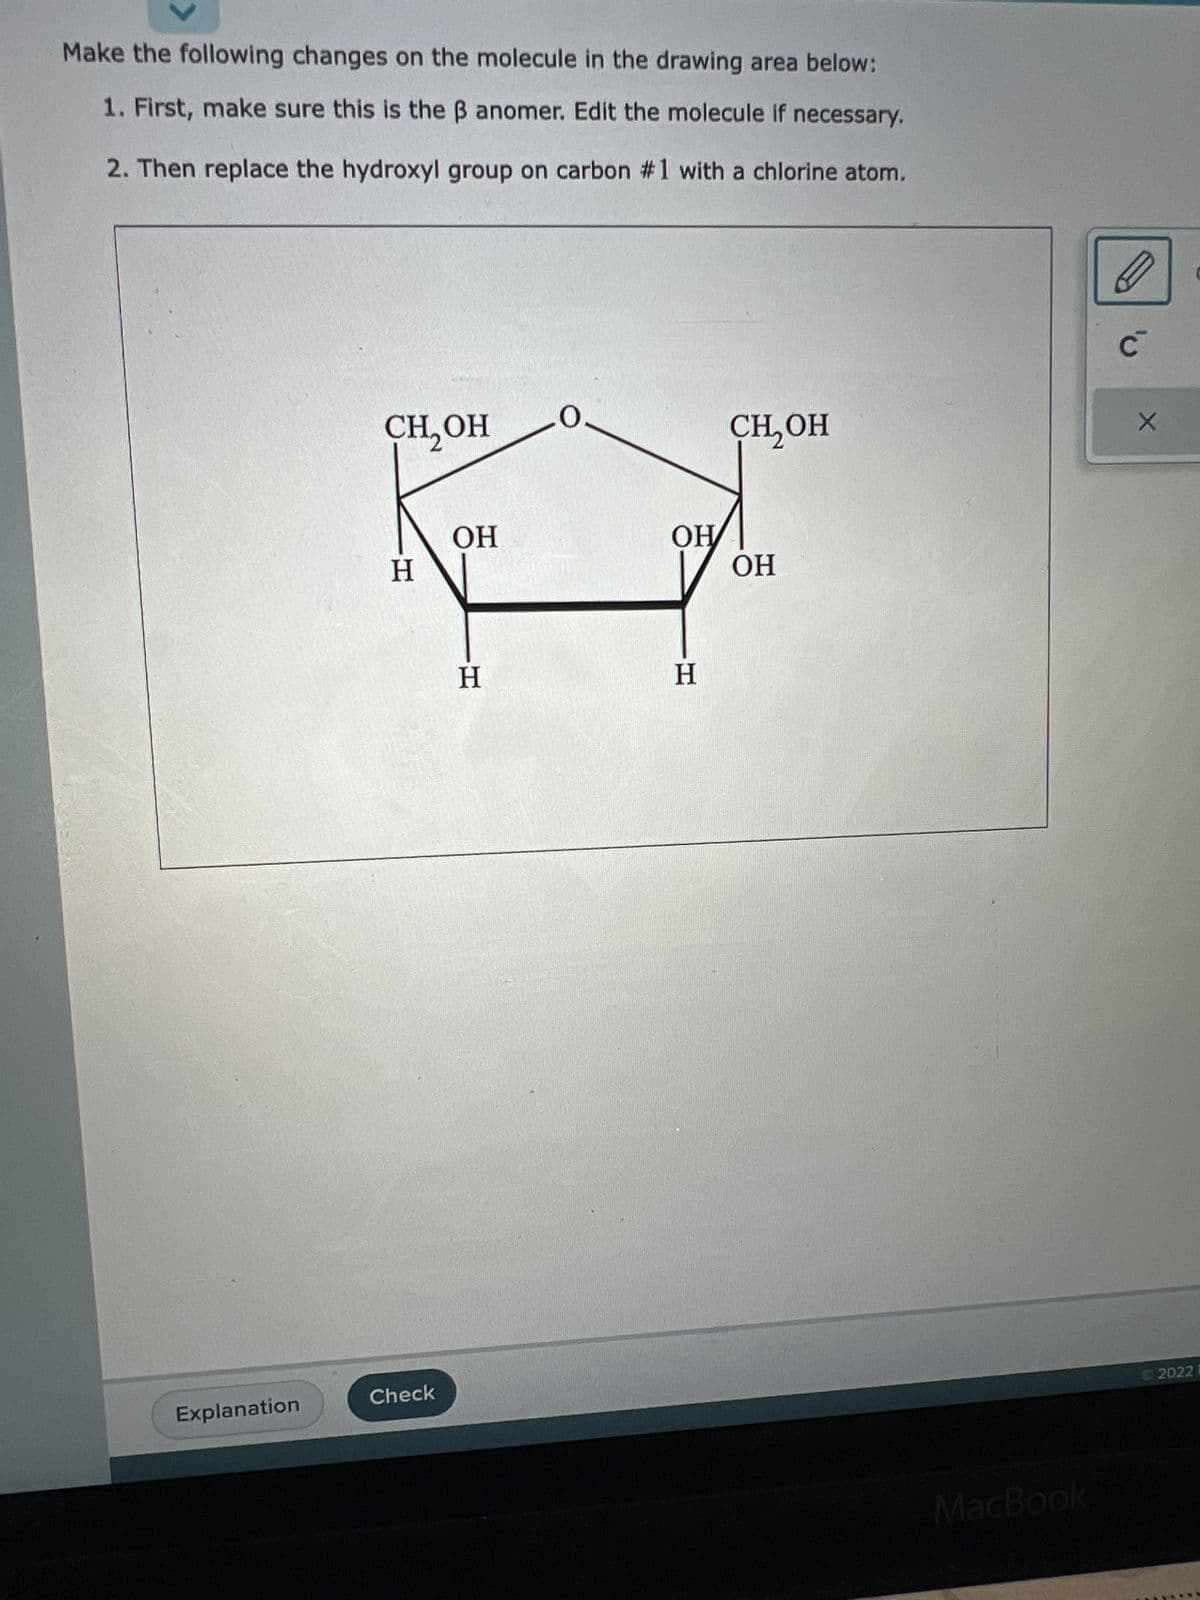 Make the following changes on the molecule in the drawing area below:
1. First, make sure this is the ß anomer. Edit the molecule if necessary.
2. Then replace the hydroxyl group on carbon #1 with a chlorine atom.
Explanation
CH₂OH
H
Check
OH
H
OH
H
CH₂OH
OH
MacBook
C
X
20221